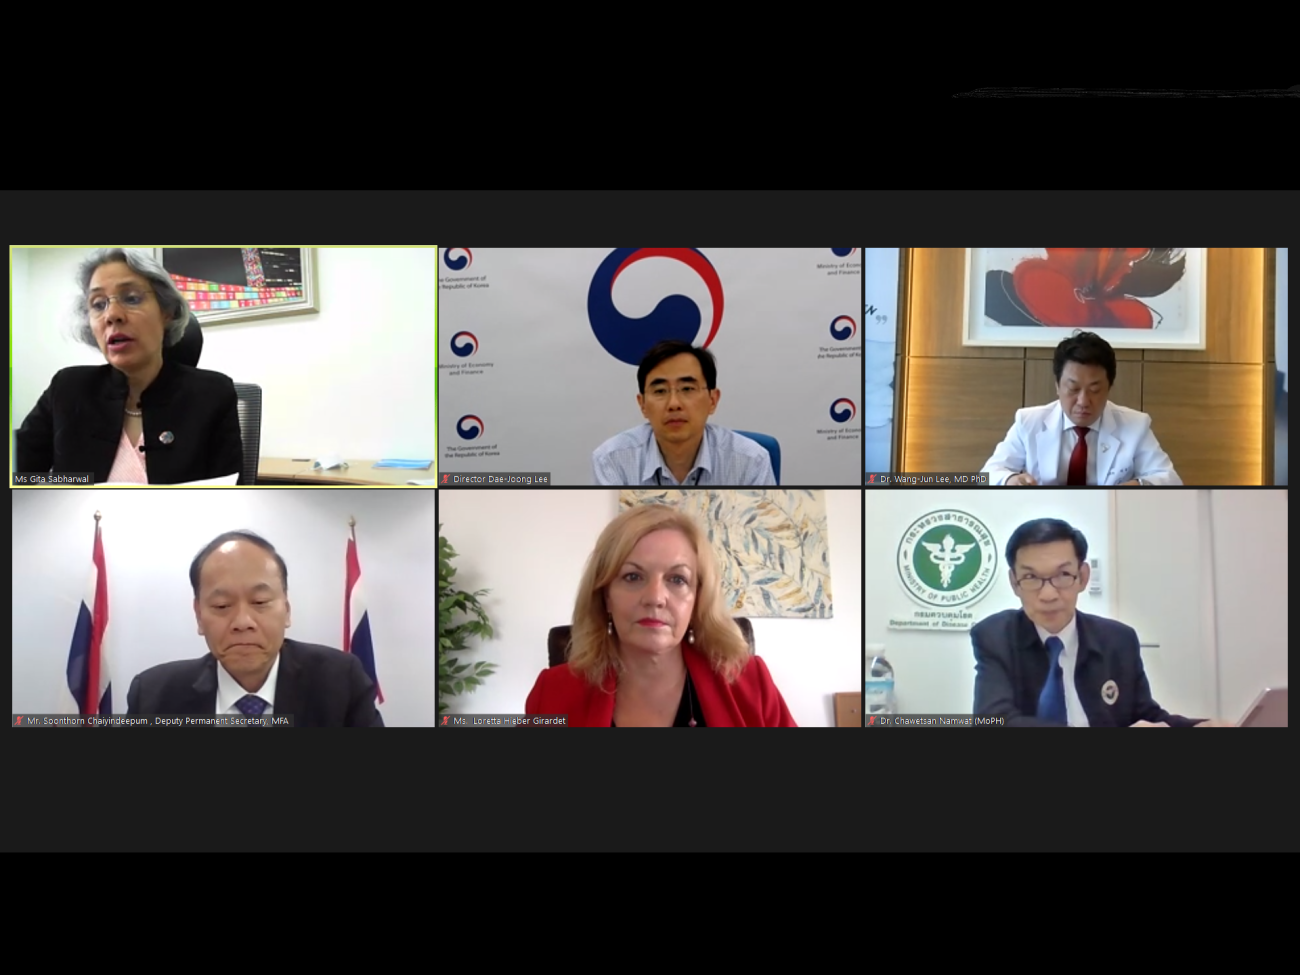 The panelists share their views for the opportunities in the 'new normal' via teleconference